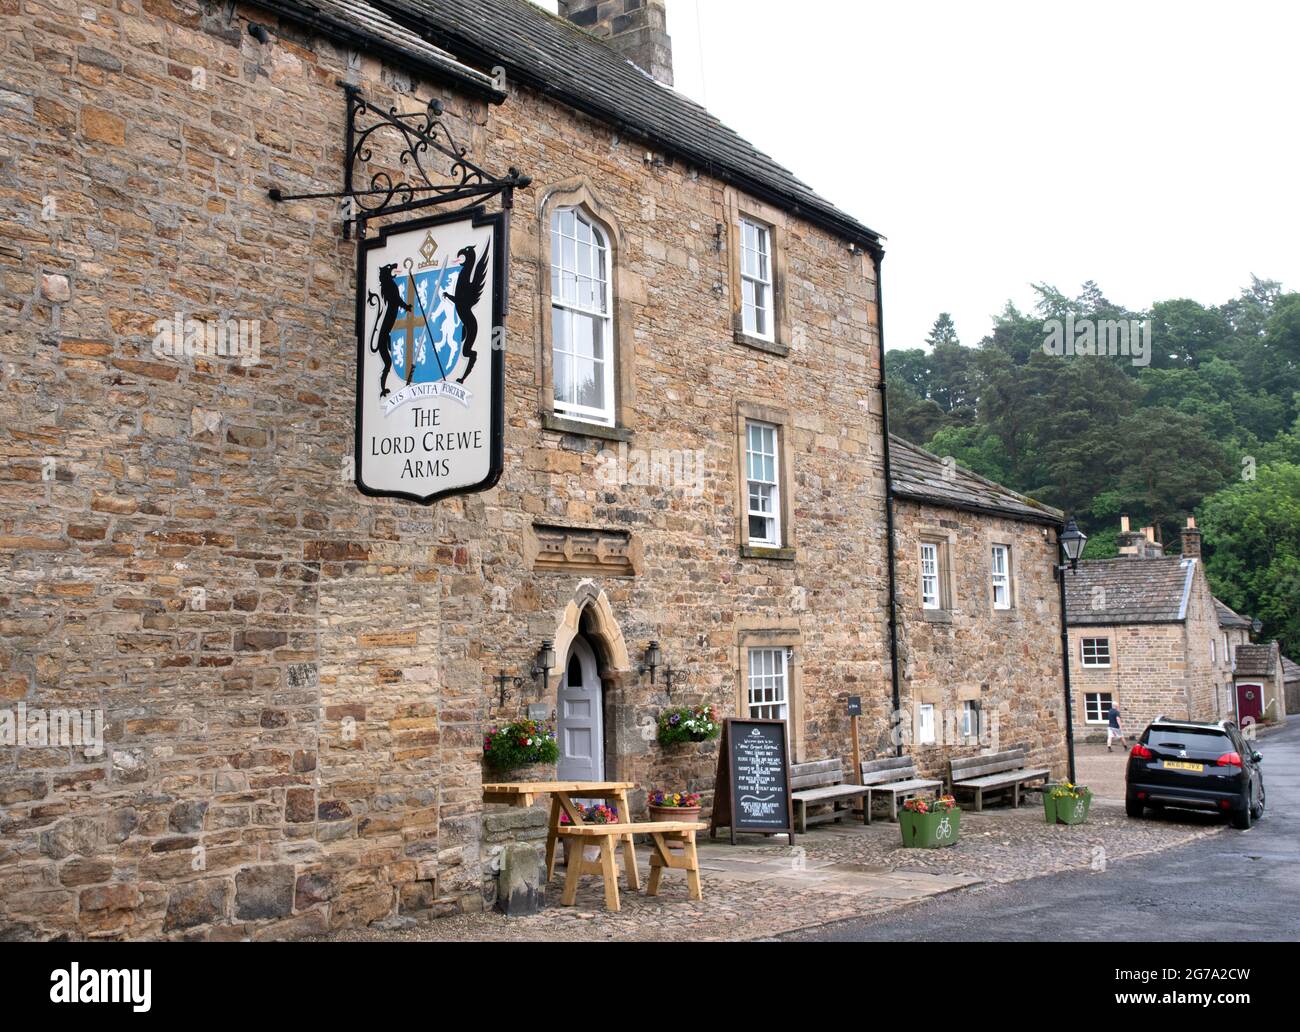 The Lord Crewe Arms, Blanchland Stock Photo